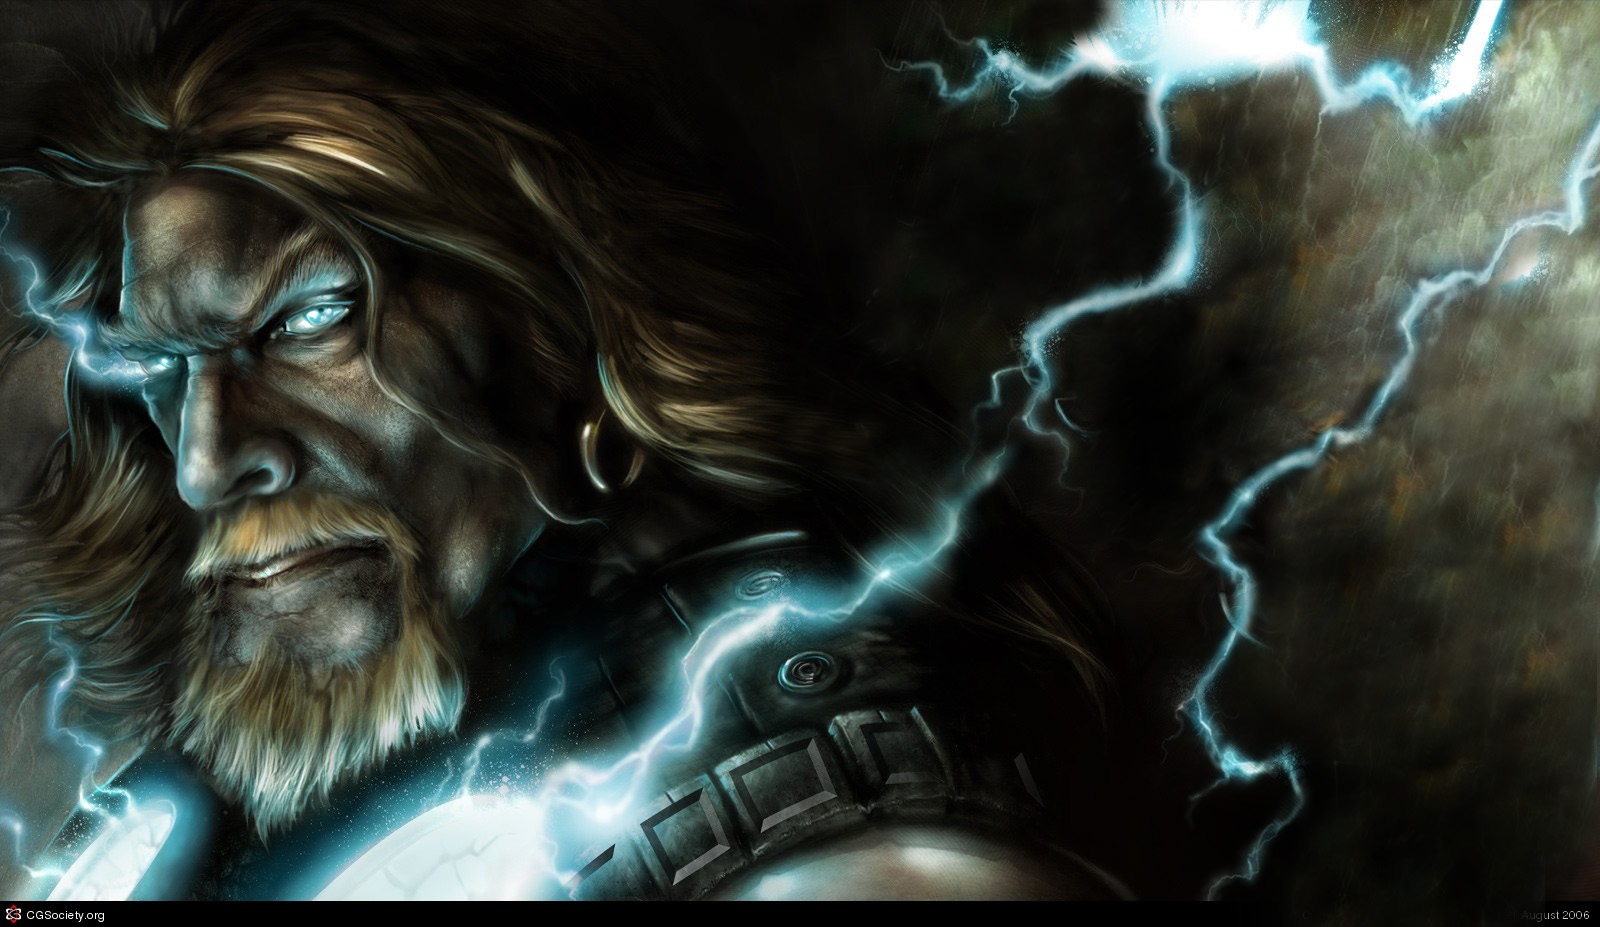 Download the Mean Thor Wallpaper, Mean Thor iPhone Wallpaper, Mean ...